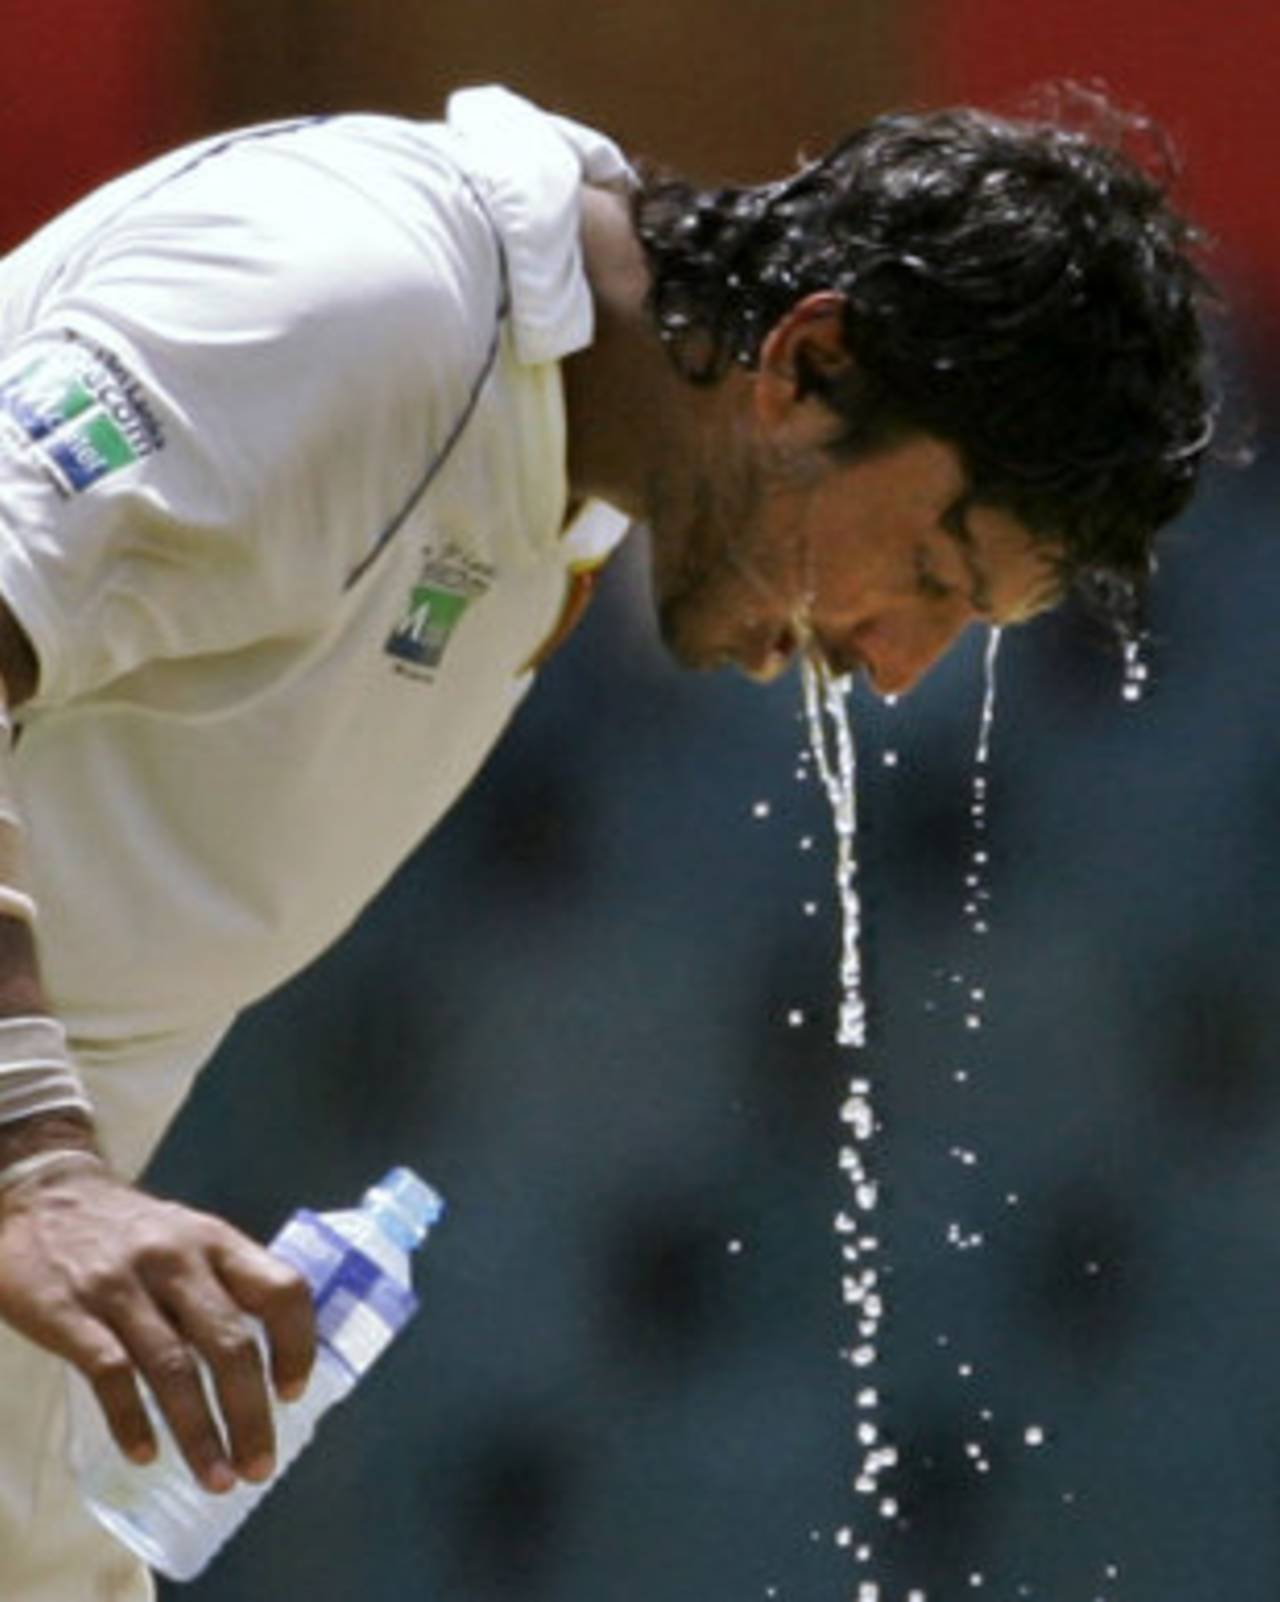 Kumar Sangakkara pours water on himself to cool down, Sri Lanka v New Zealand, 2nd Test, SSC, Colombo, 4th day, August 29, 2009 